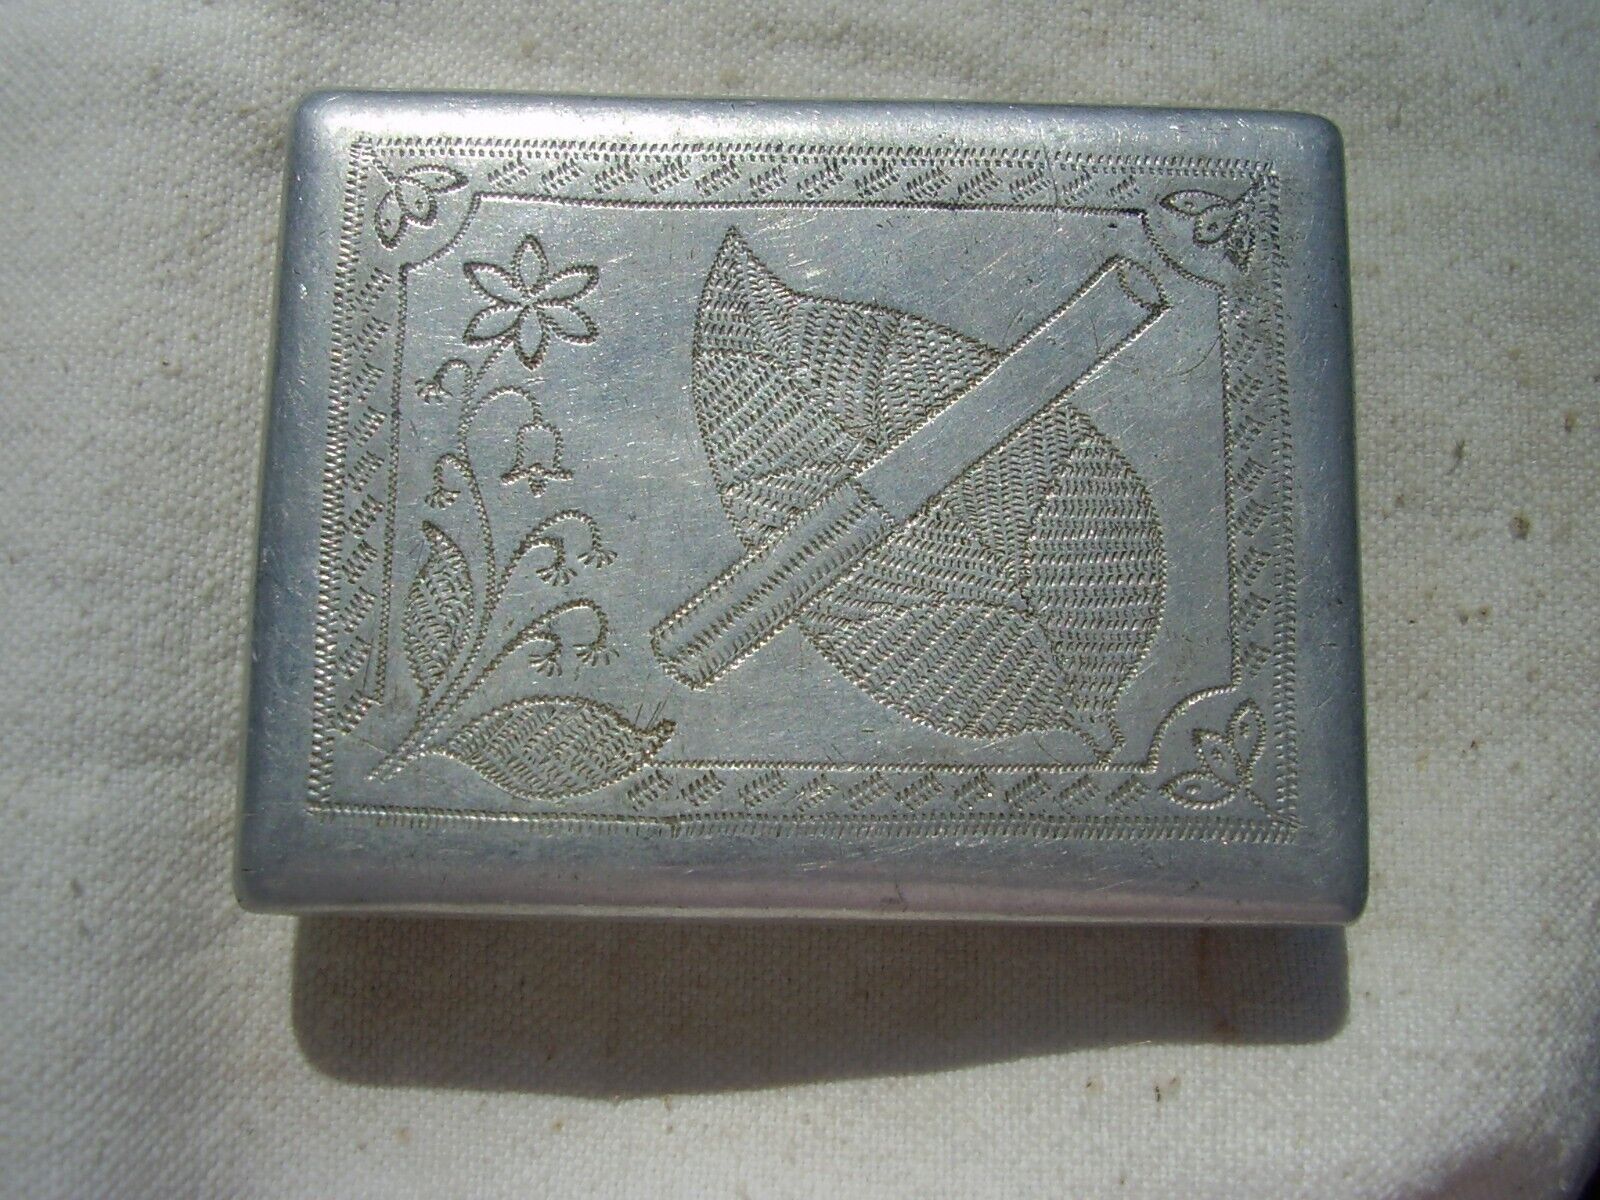 WW2 Red Army Cigarette BoxTrench Art for gift